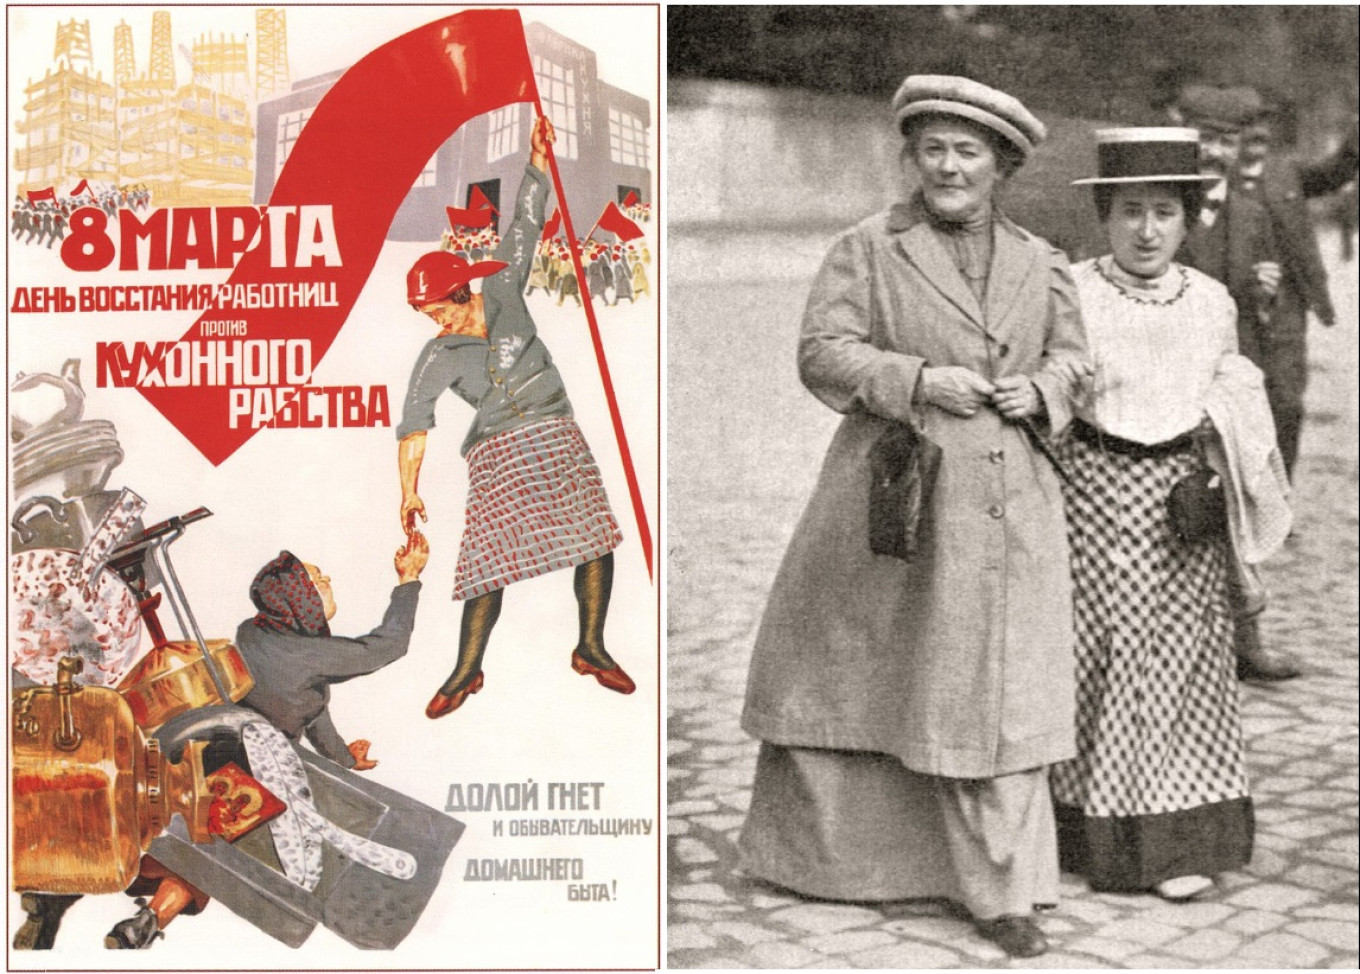  Poster "The Day of Workers' Revolt against Kitchen Slavery" (1932) and photo of Clara Zetkin and Rosa Luxemburg (1910). Wiki Commons 